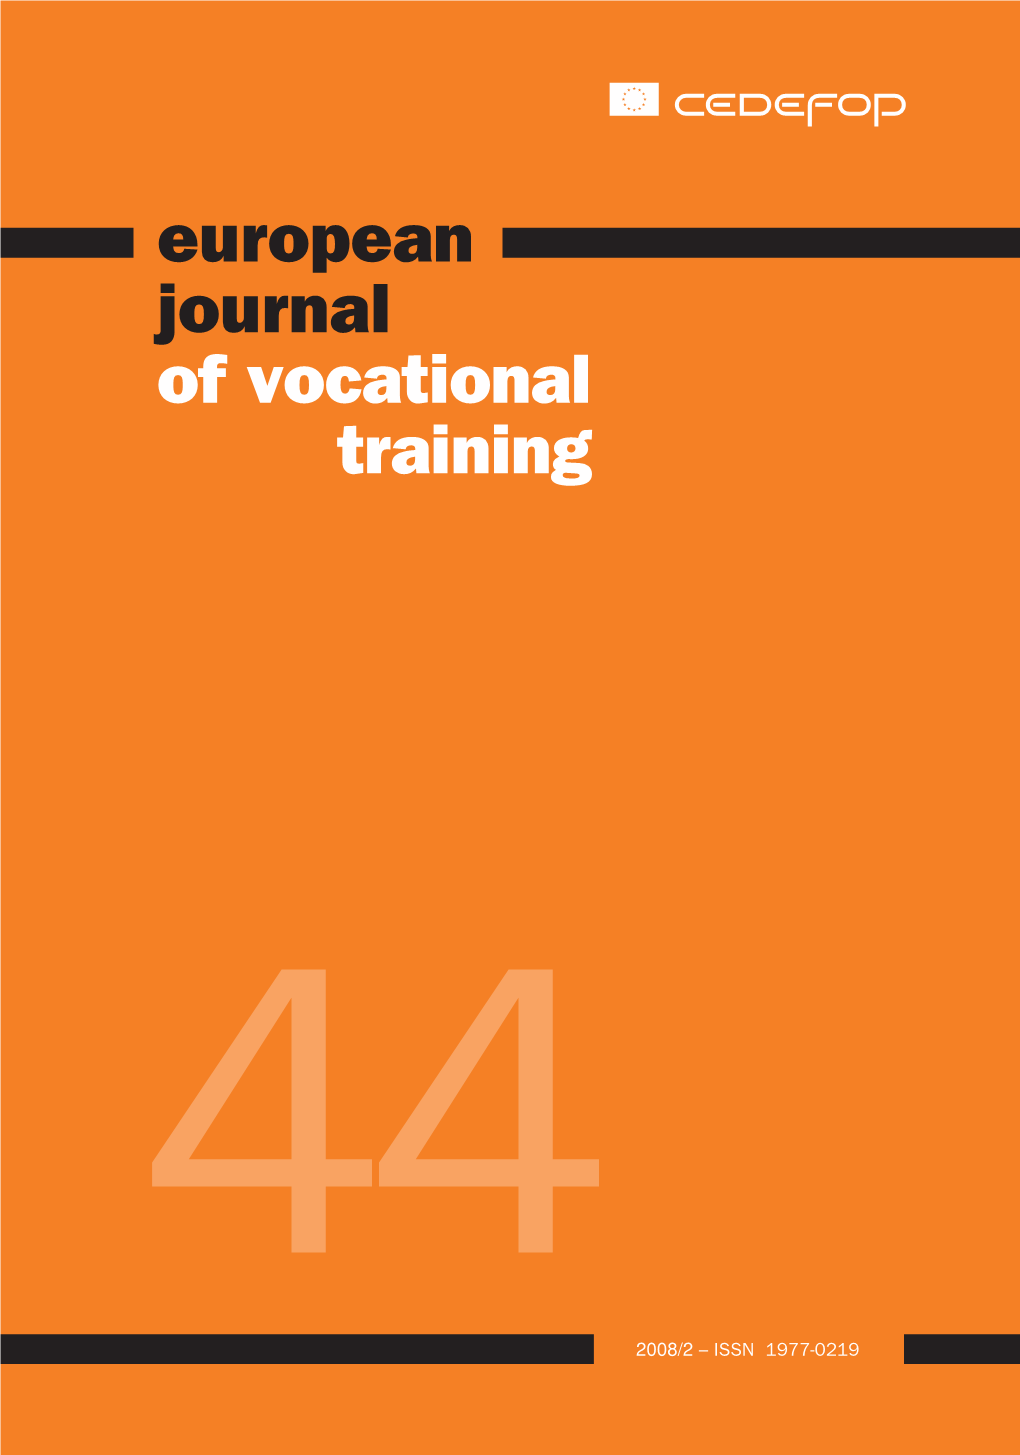 Journal of Vocational Training, Researchers to Identify Trends and Future Questions